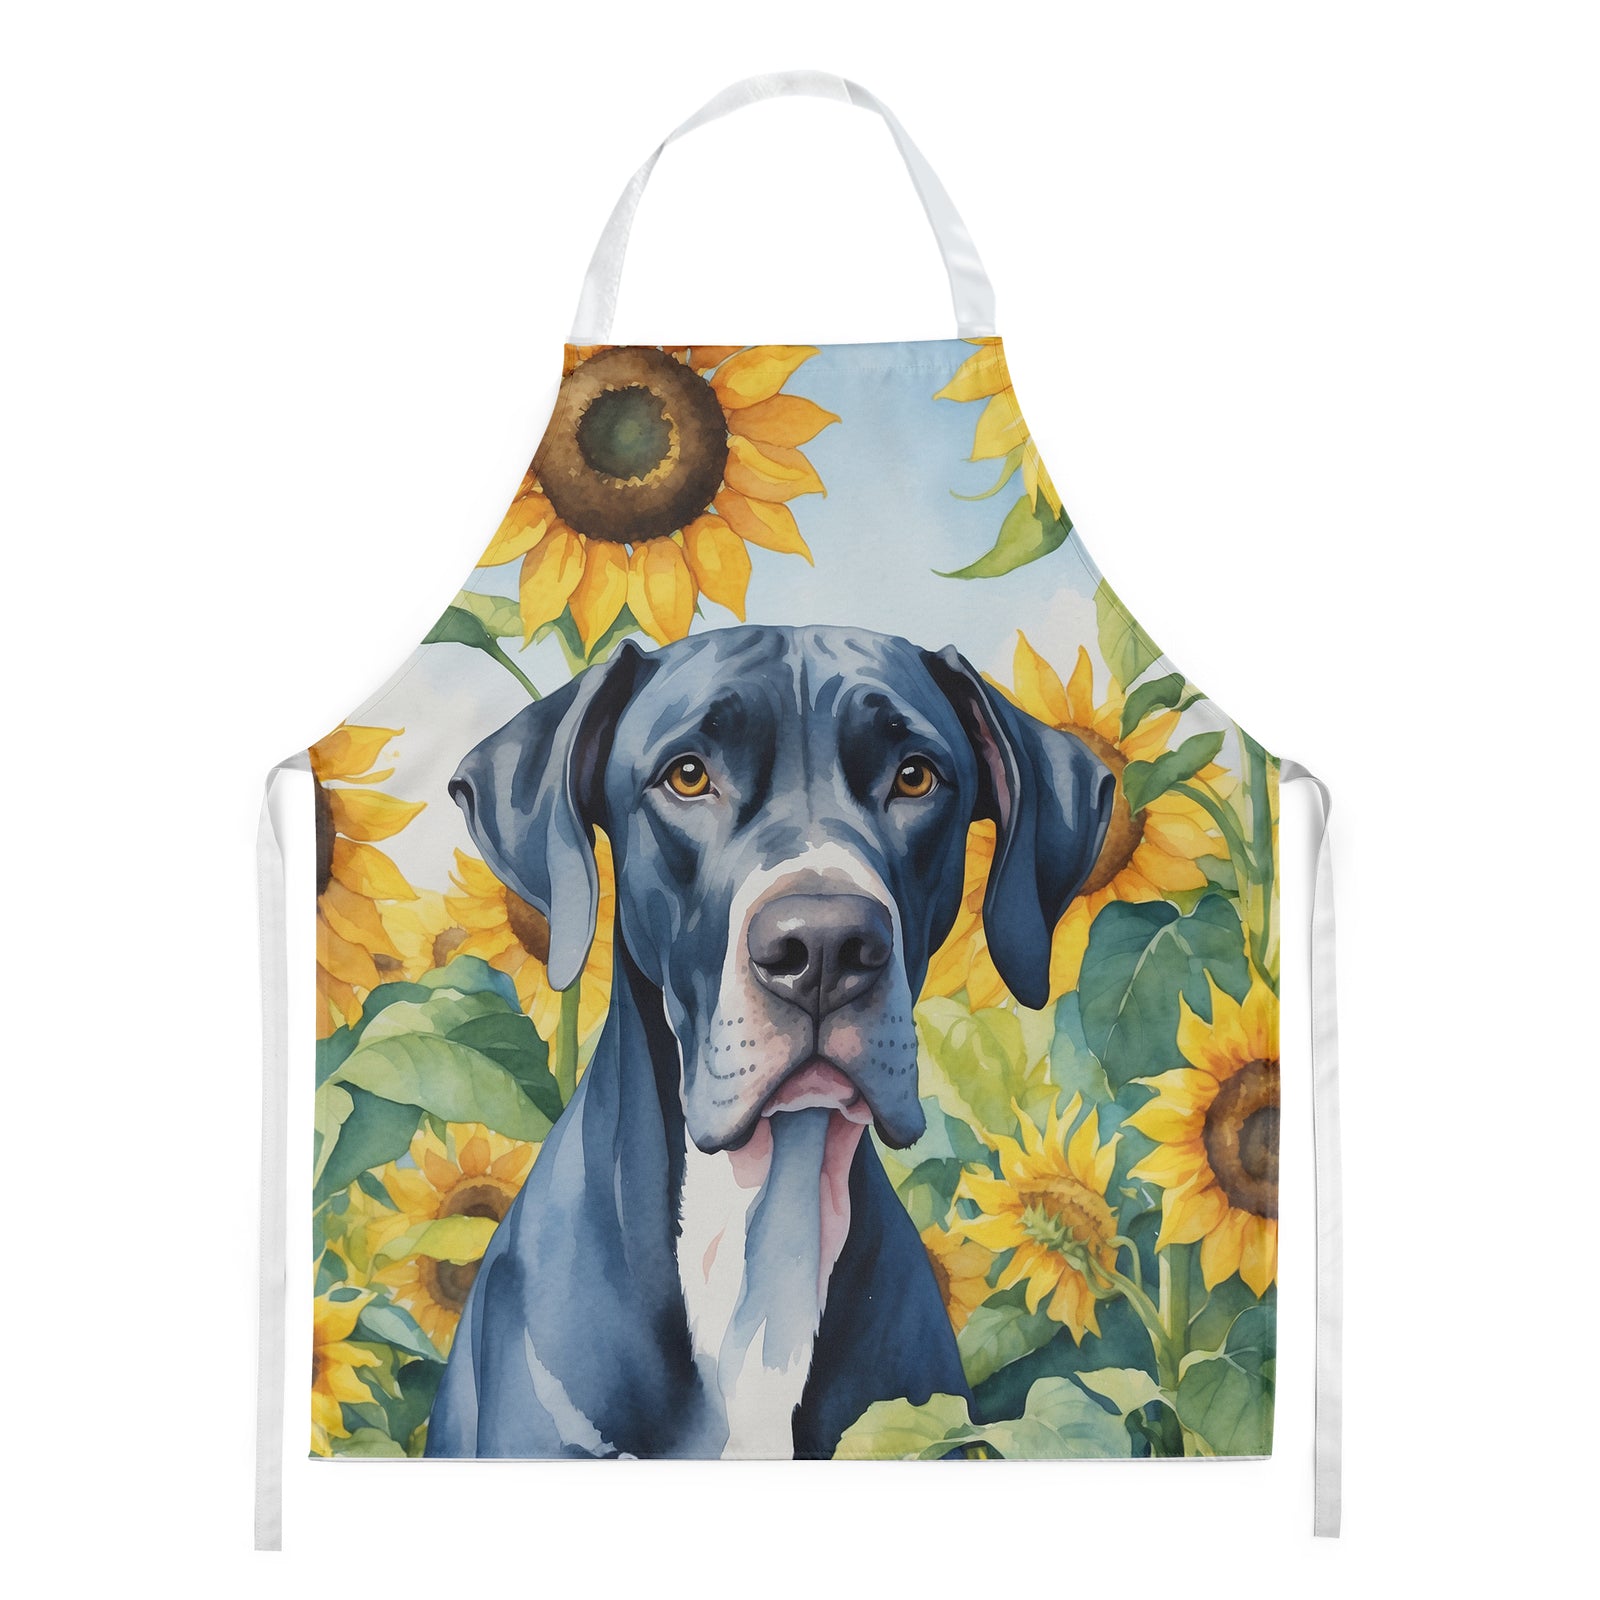 Buy this Great Dane in Sunflowers Apron